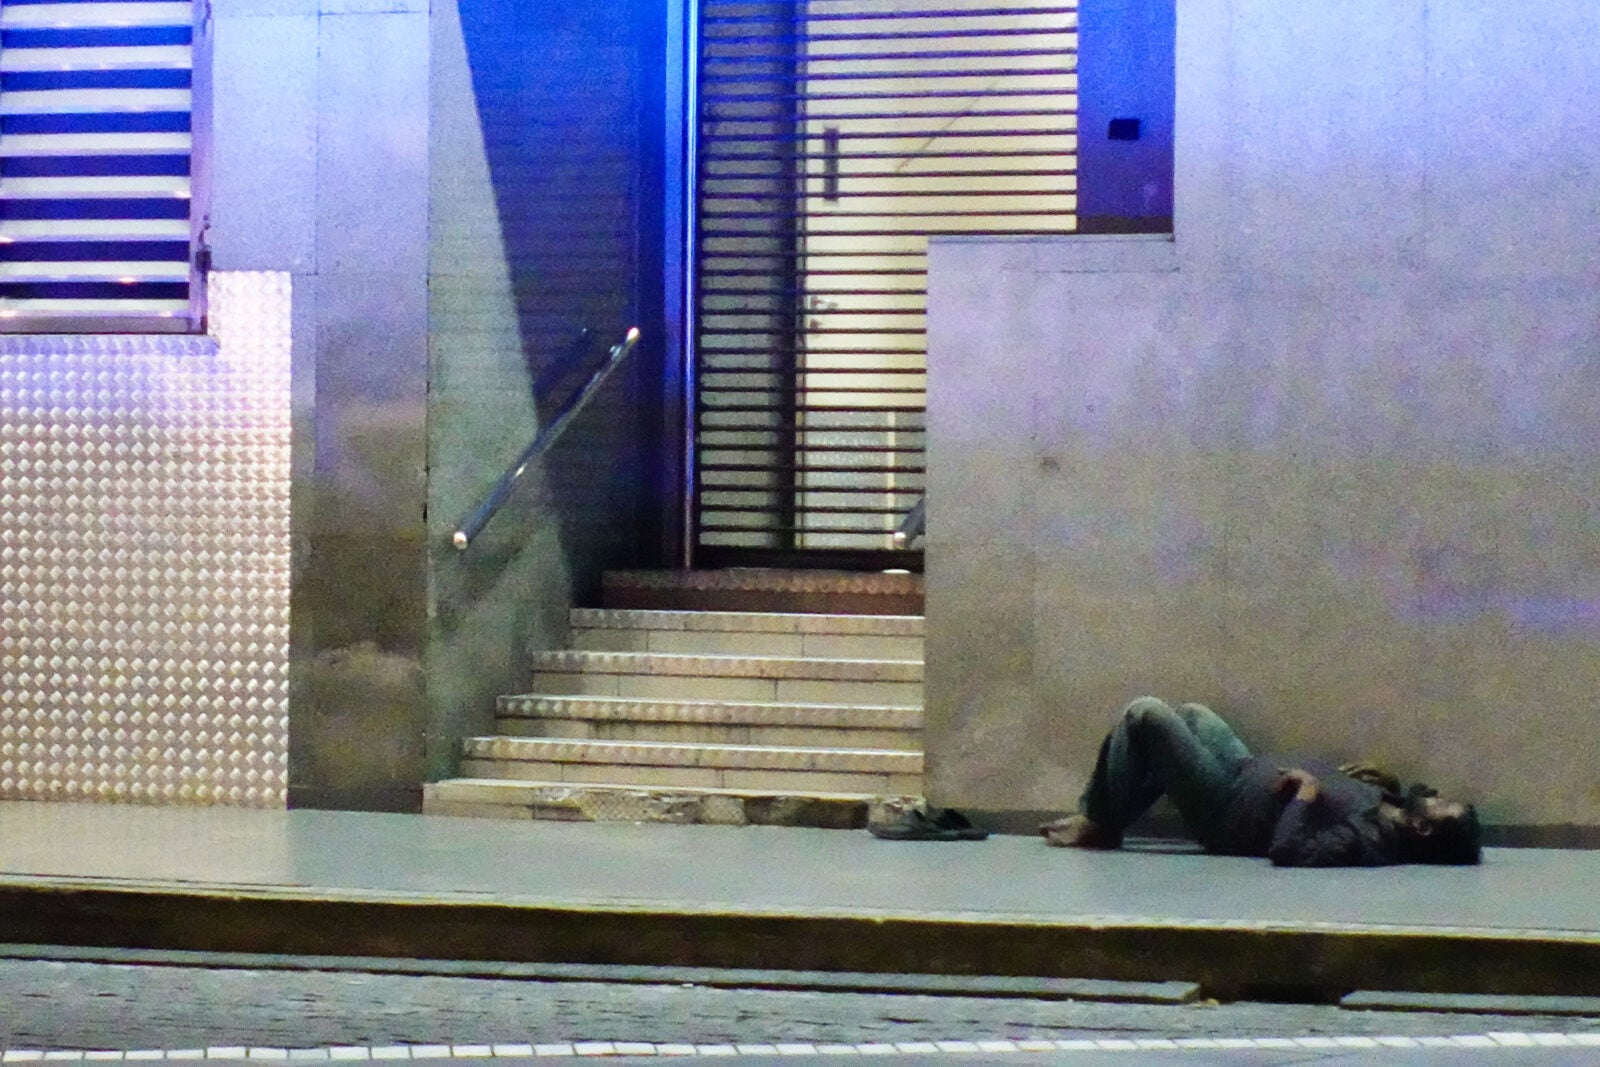 A homeless Malaysian man laying down on the floor in front of a building in Kuala Lumpur.